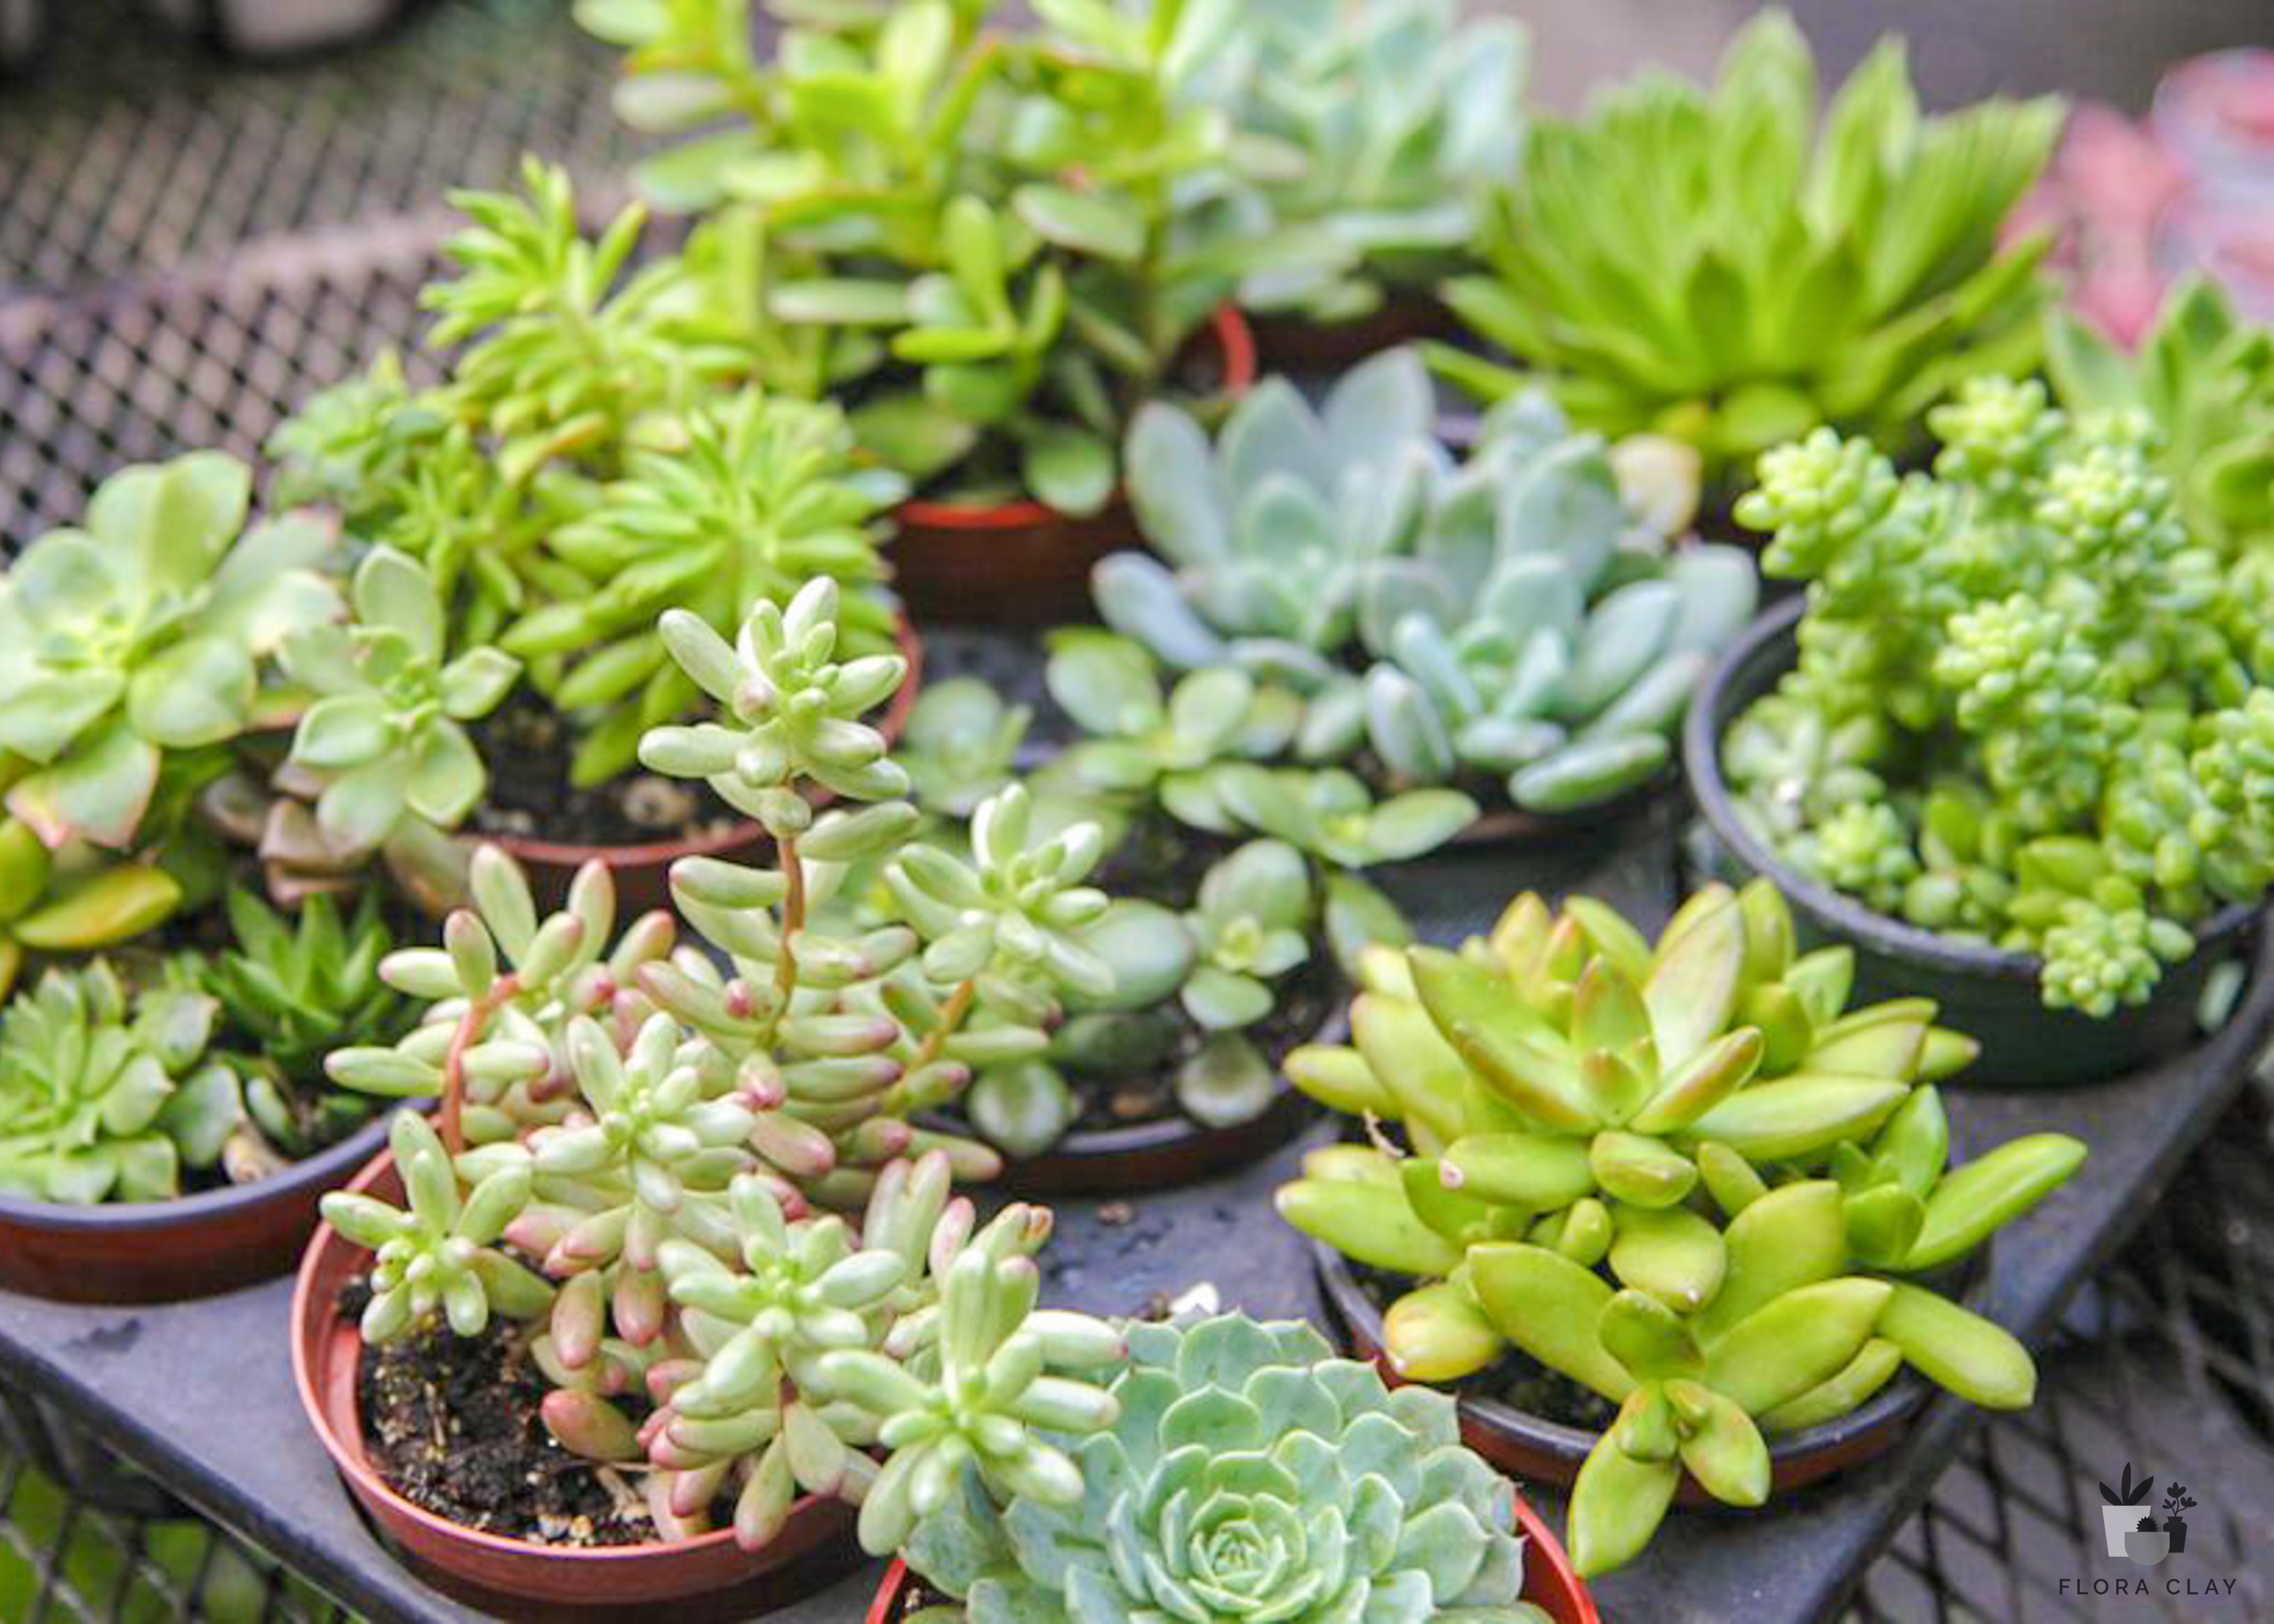 4-in-assorted-succulents-tray-flora-clay-2.jpg